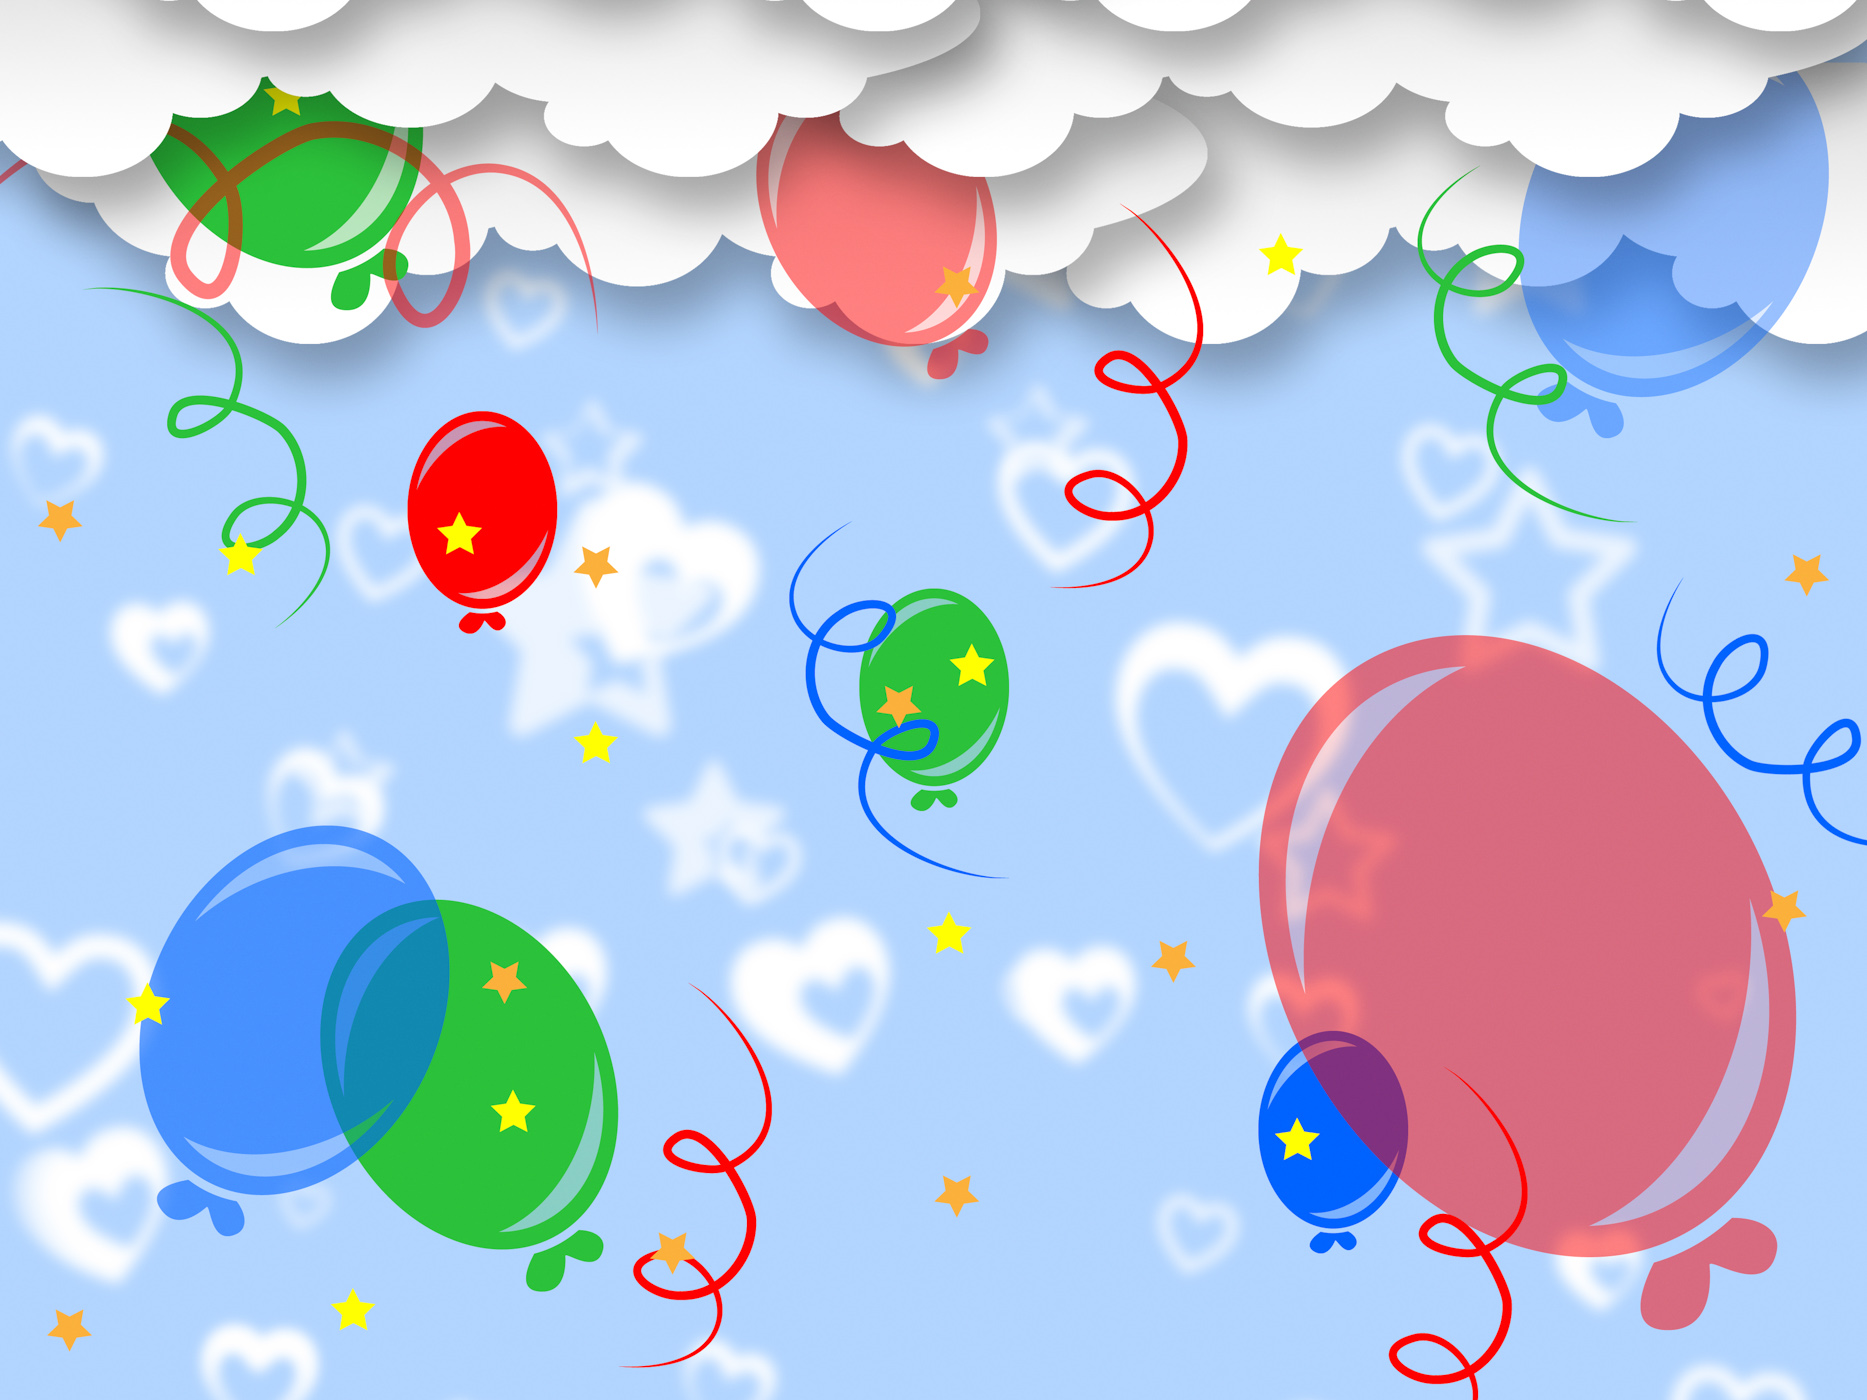 Celebrate Balloons Indicates Backgrounds Template And Party, Abstract, Cheerful, Party, Parties, HQ Photo